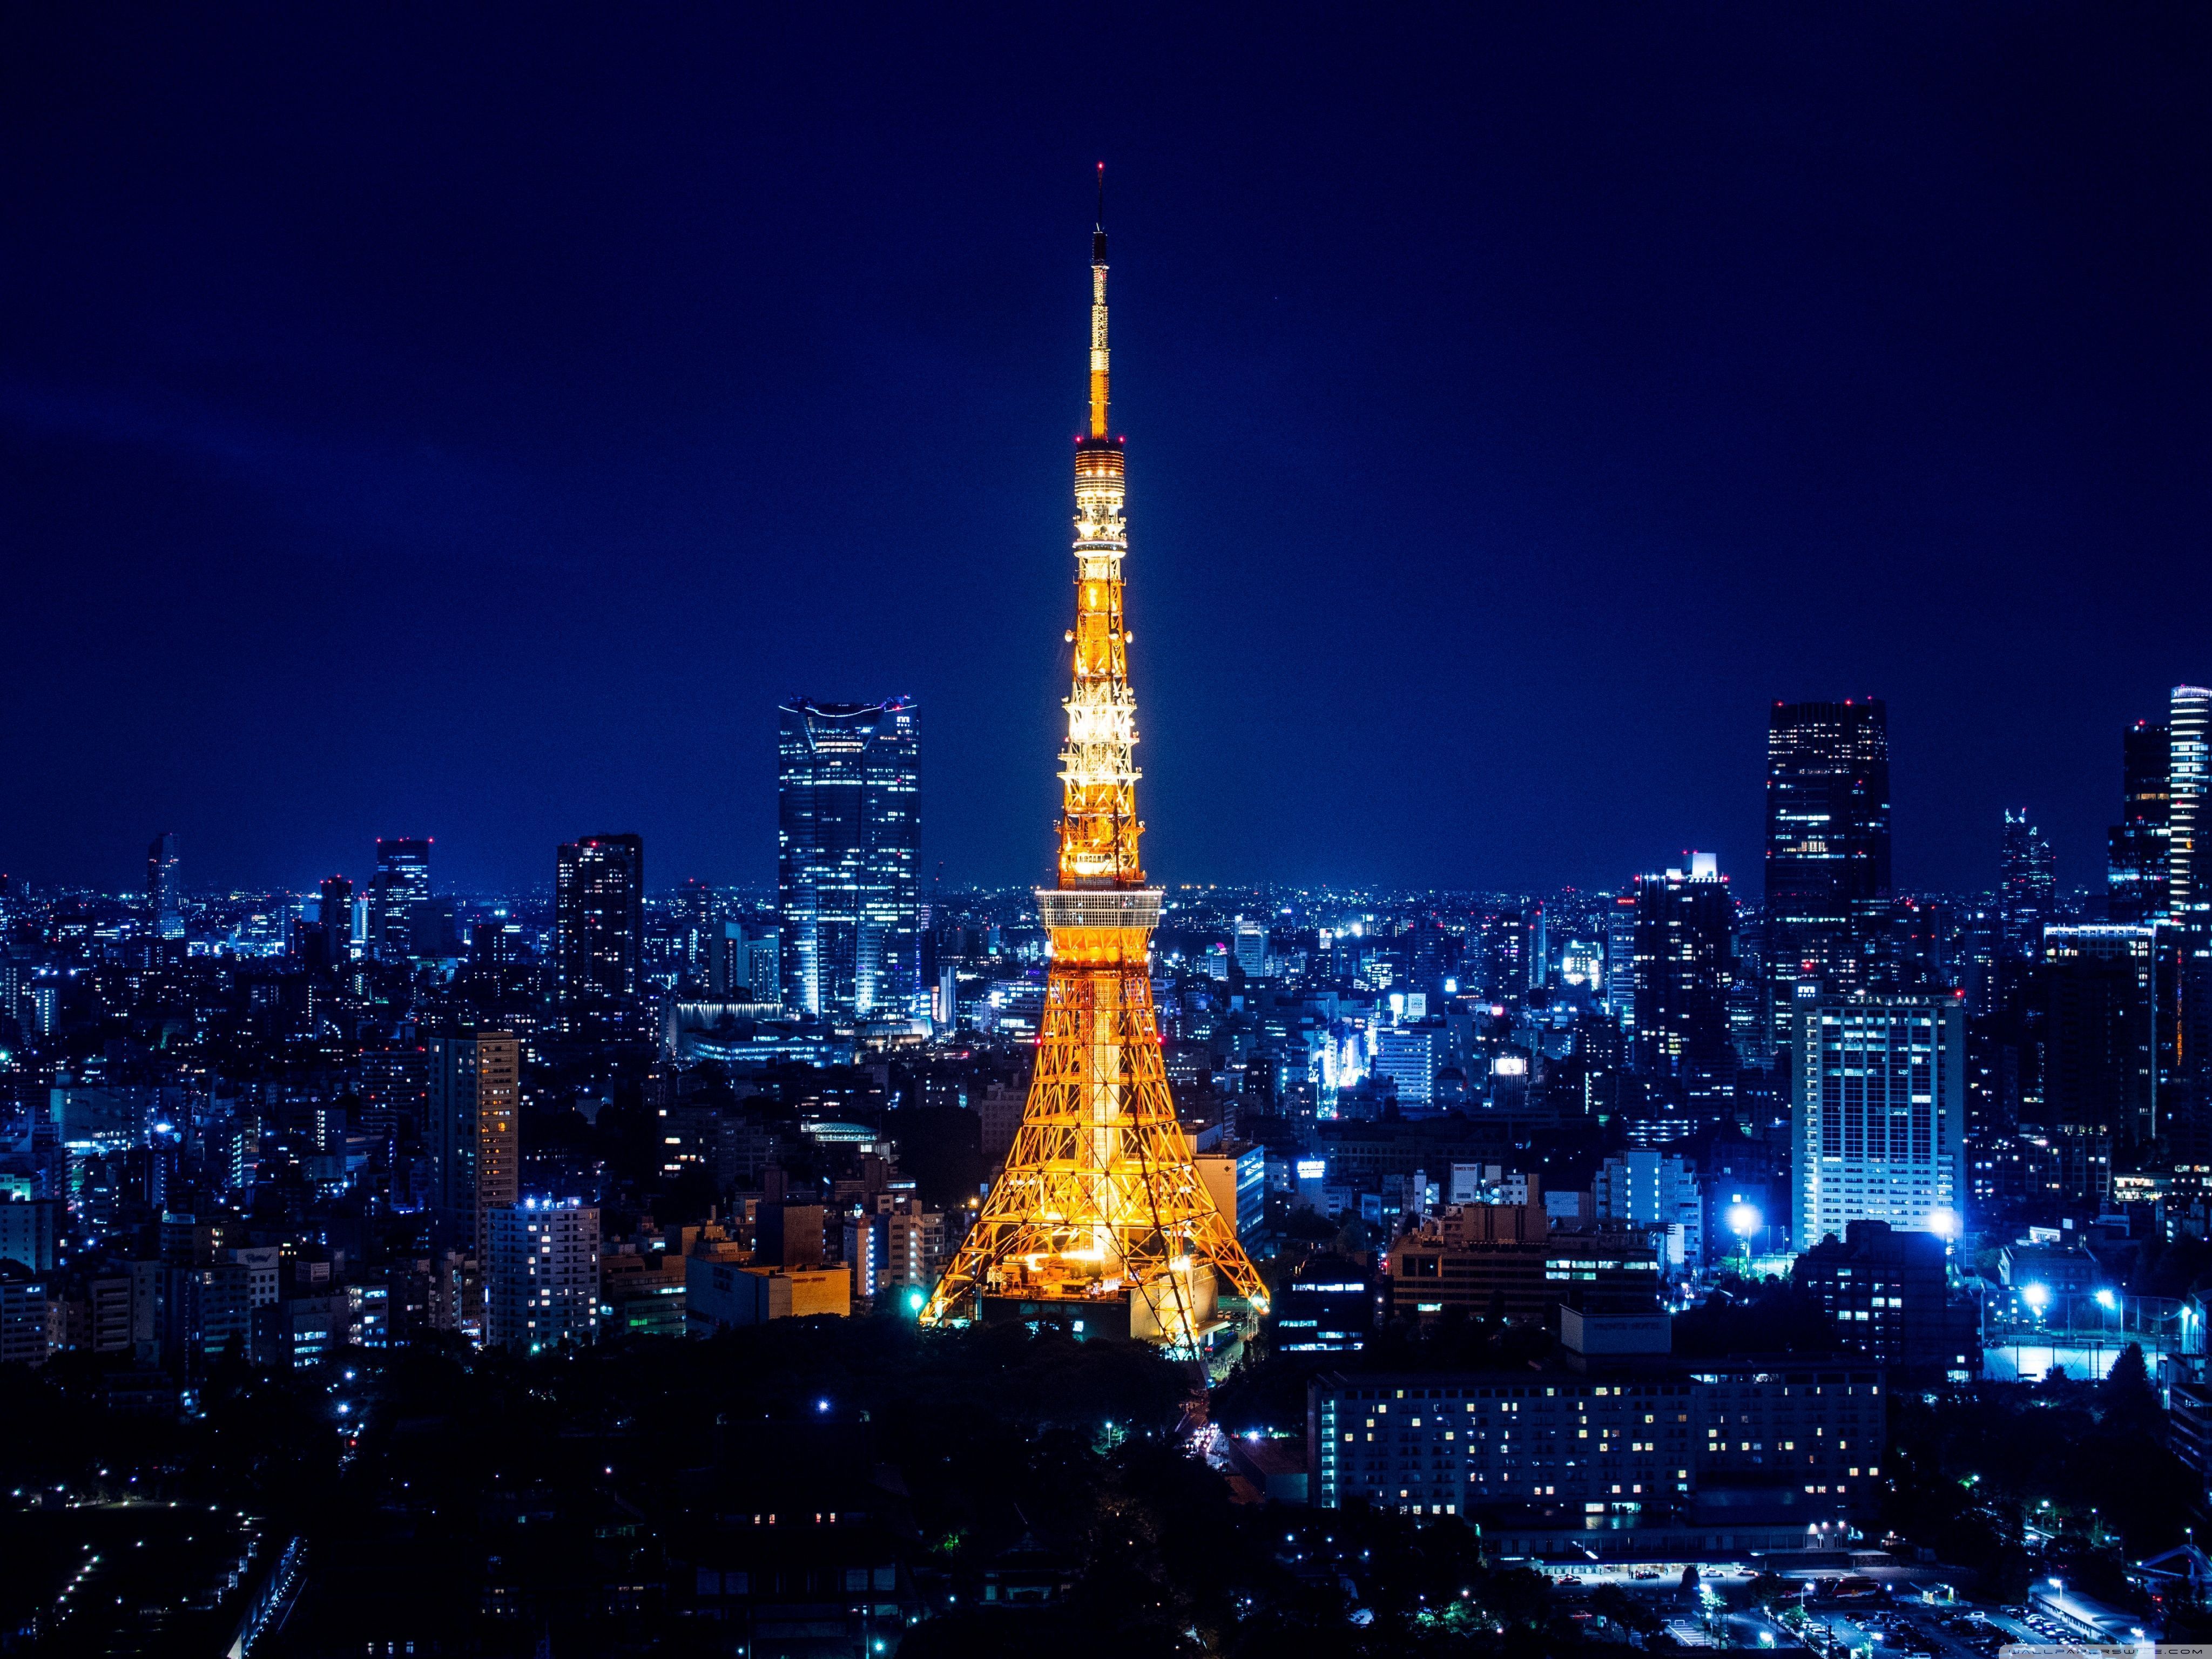 Night city, Lights, Tokyo tower, Big town wallpaper and image